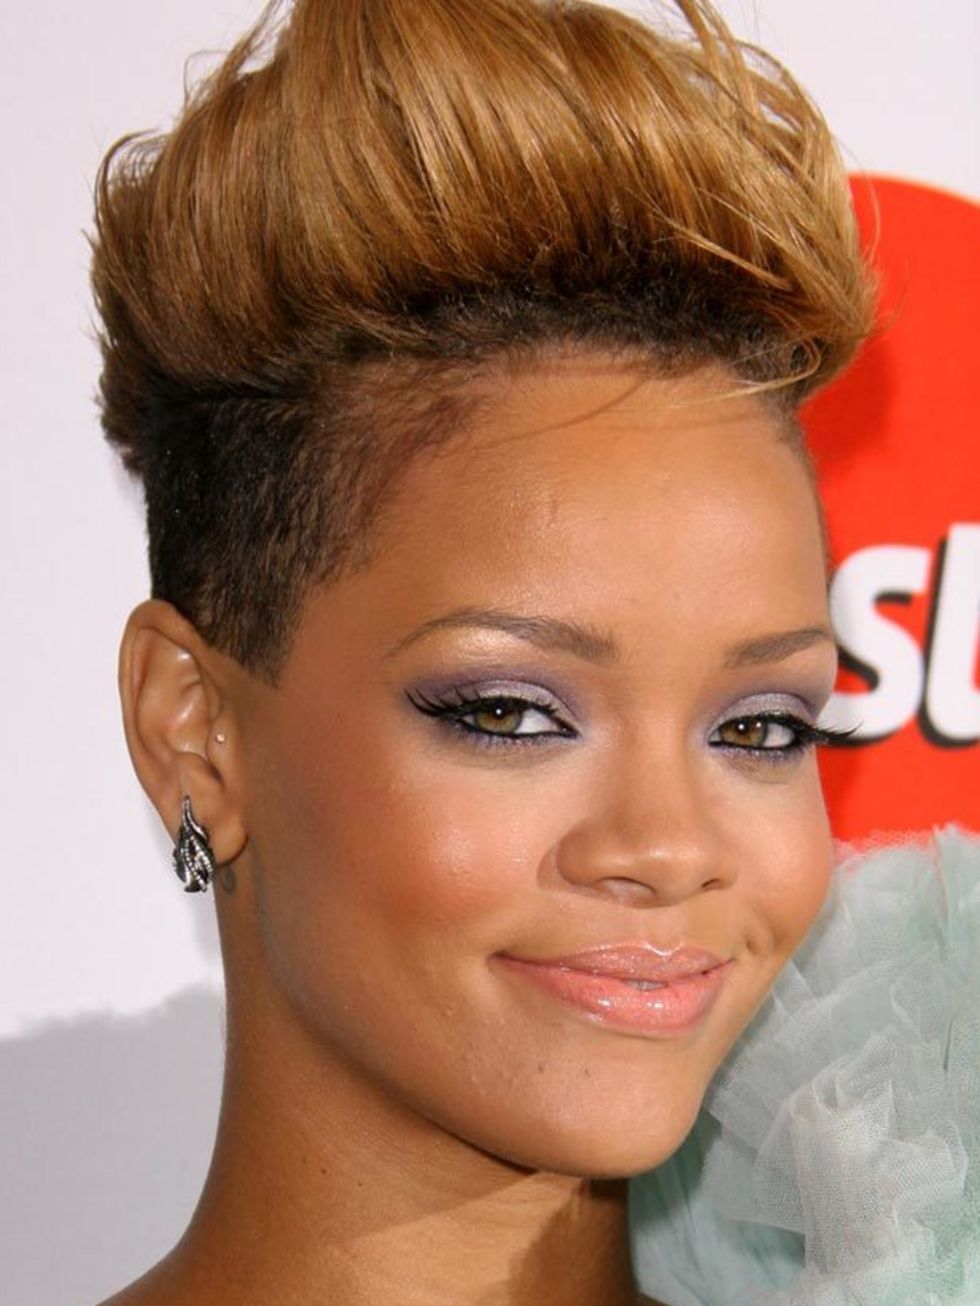 <p><a href="http://www.elleuk.com/starstyle/style-files/%28section%29/Rihanna">Click here to see more of Rihanna's looks...</a></p>